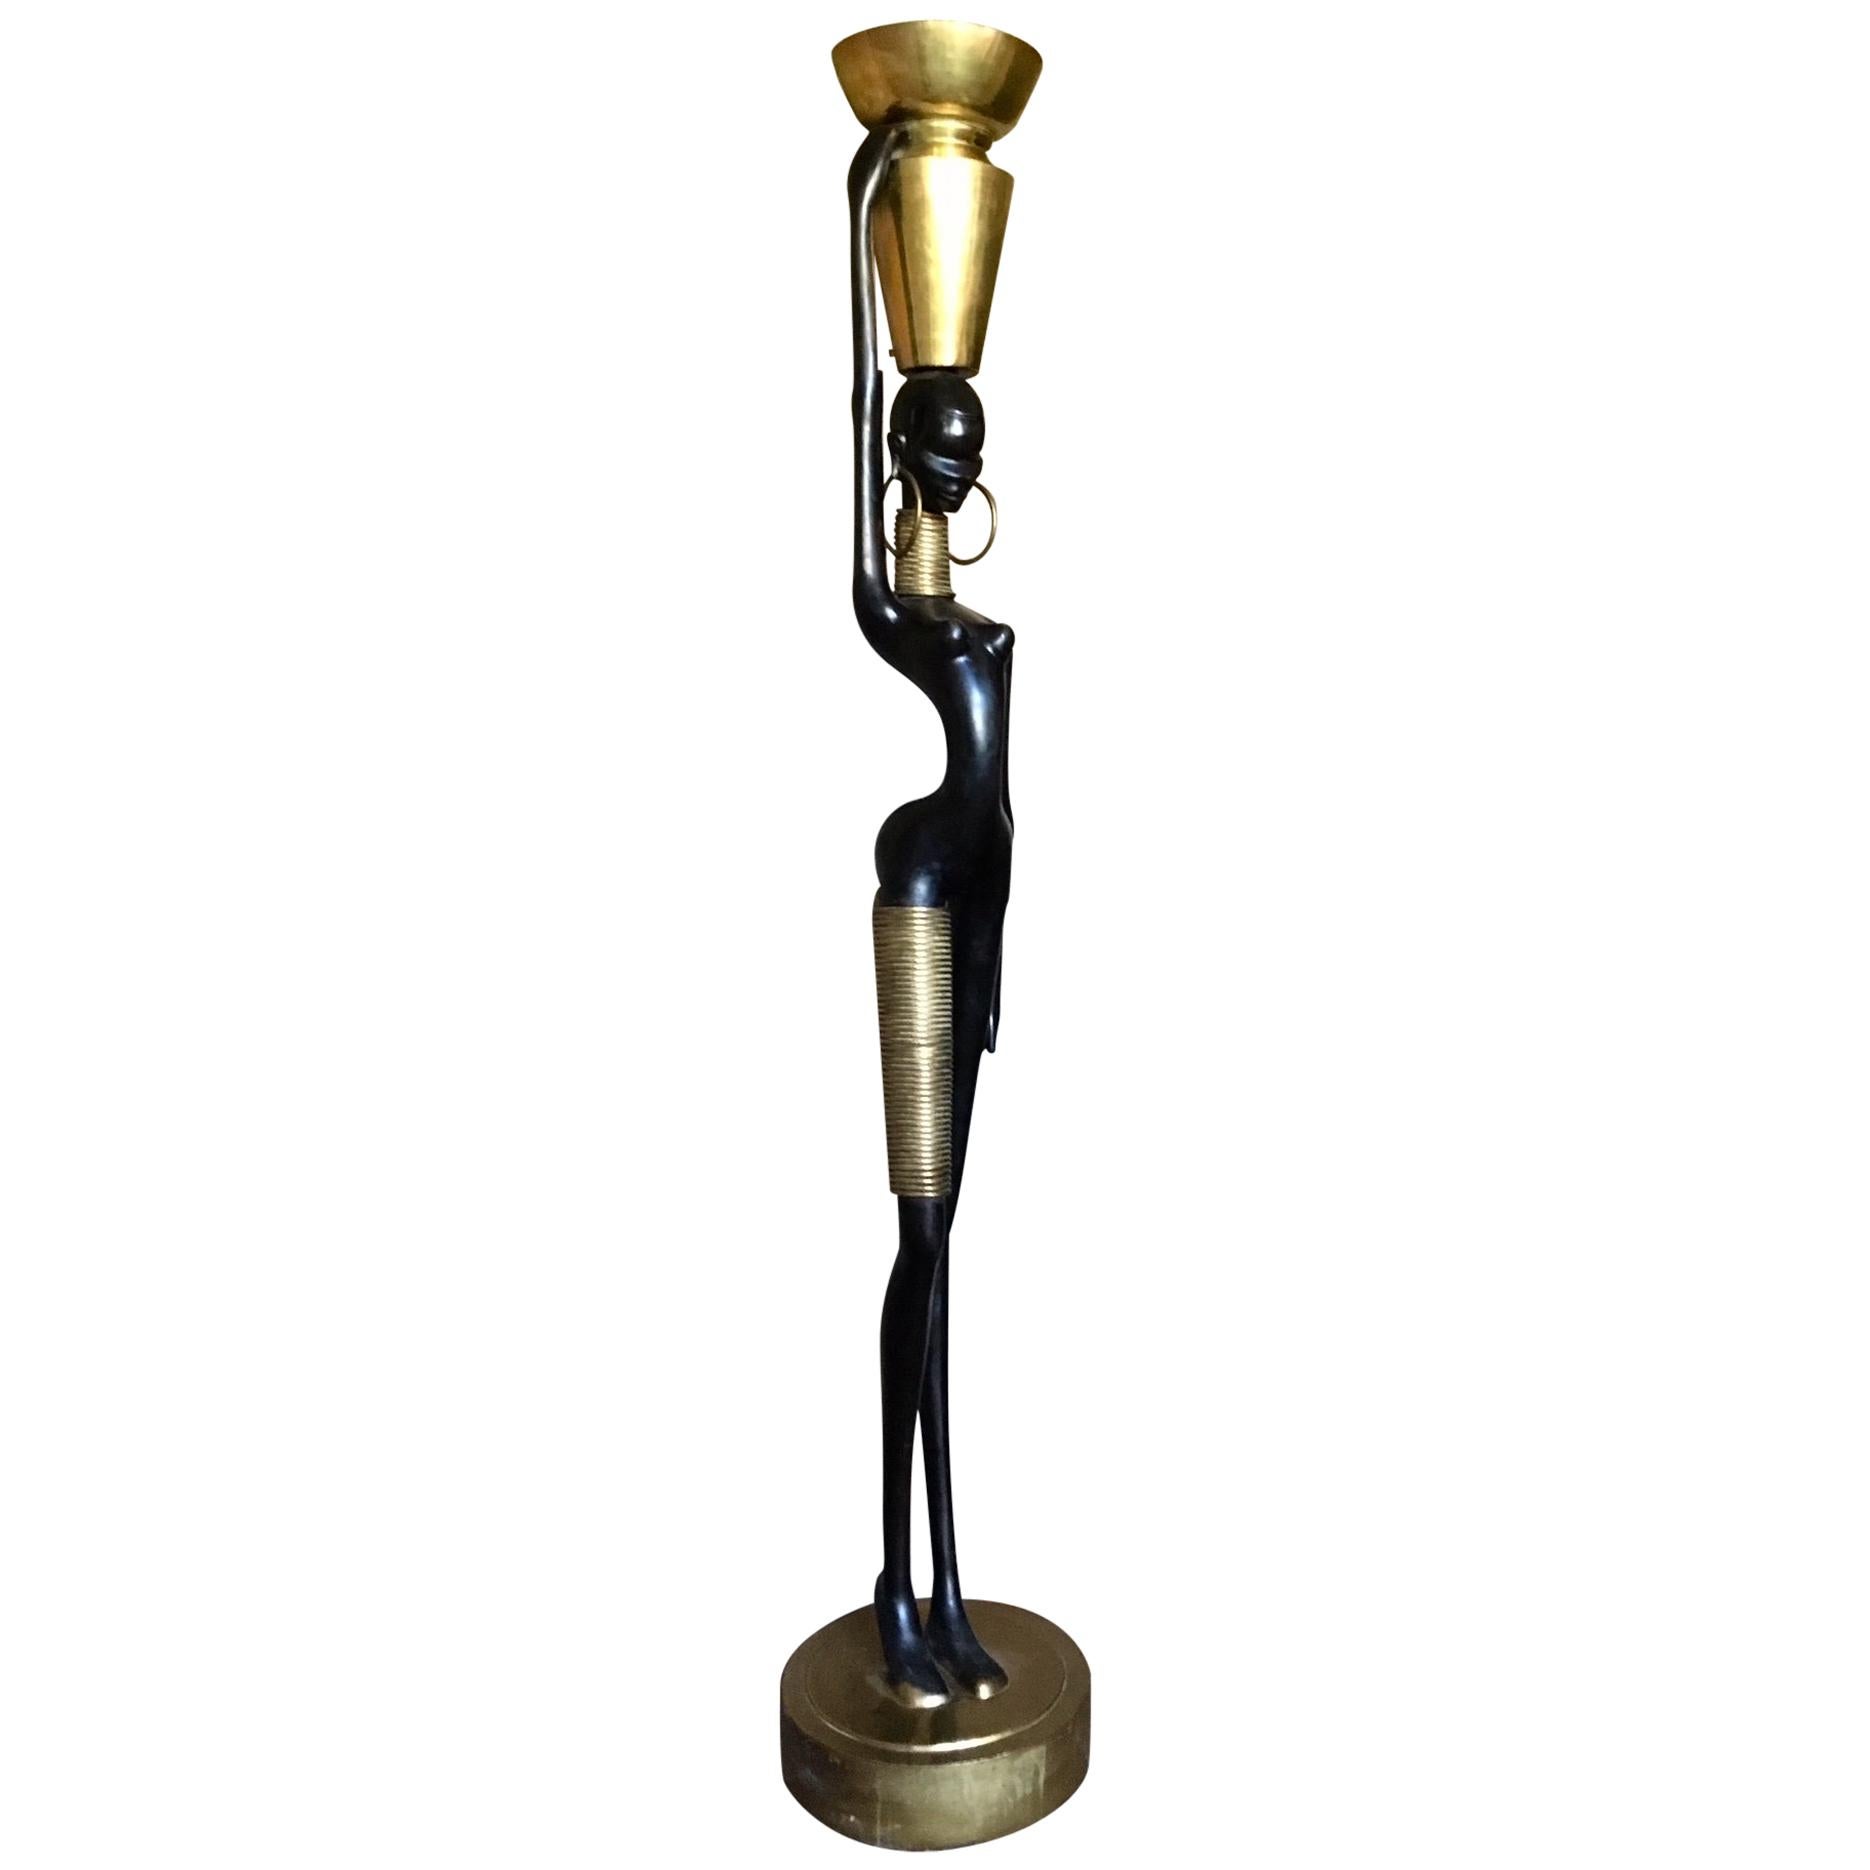 Rare Human Sized Figurine, Floor Lamp of a Beautiful African Woman by Hagenauer